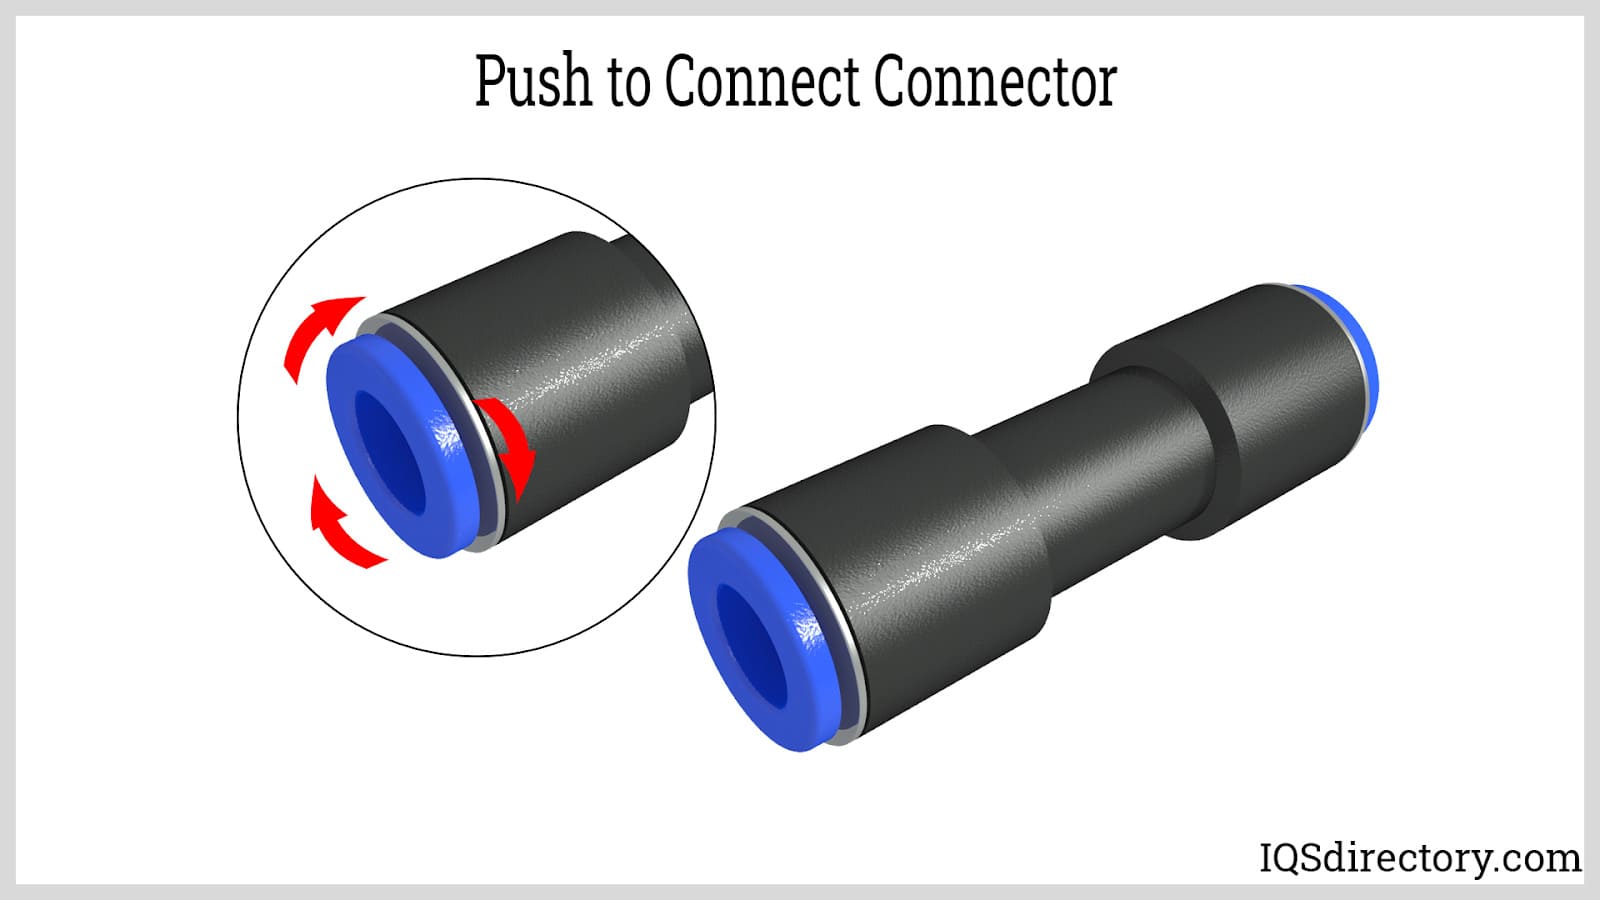 Push to Connect Connector